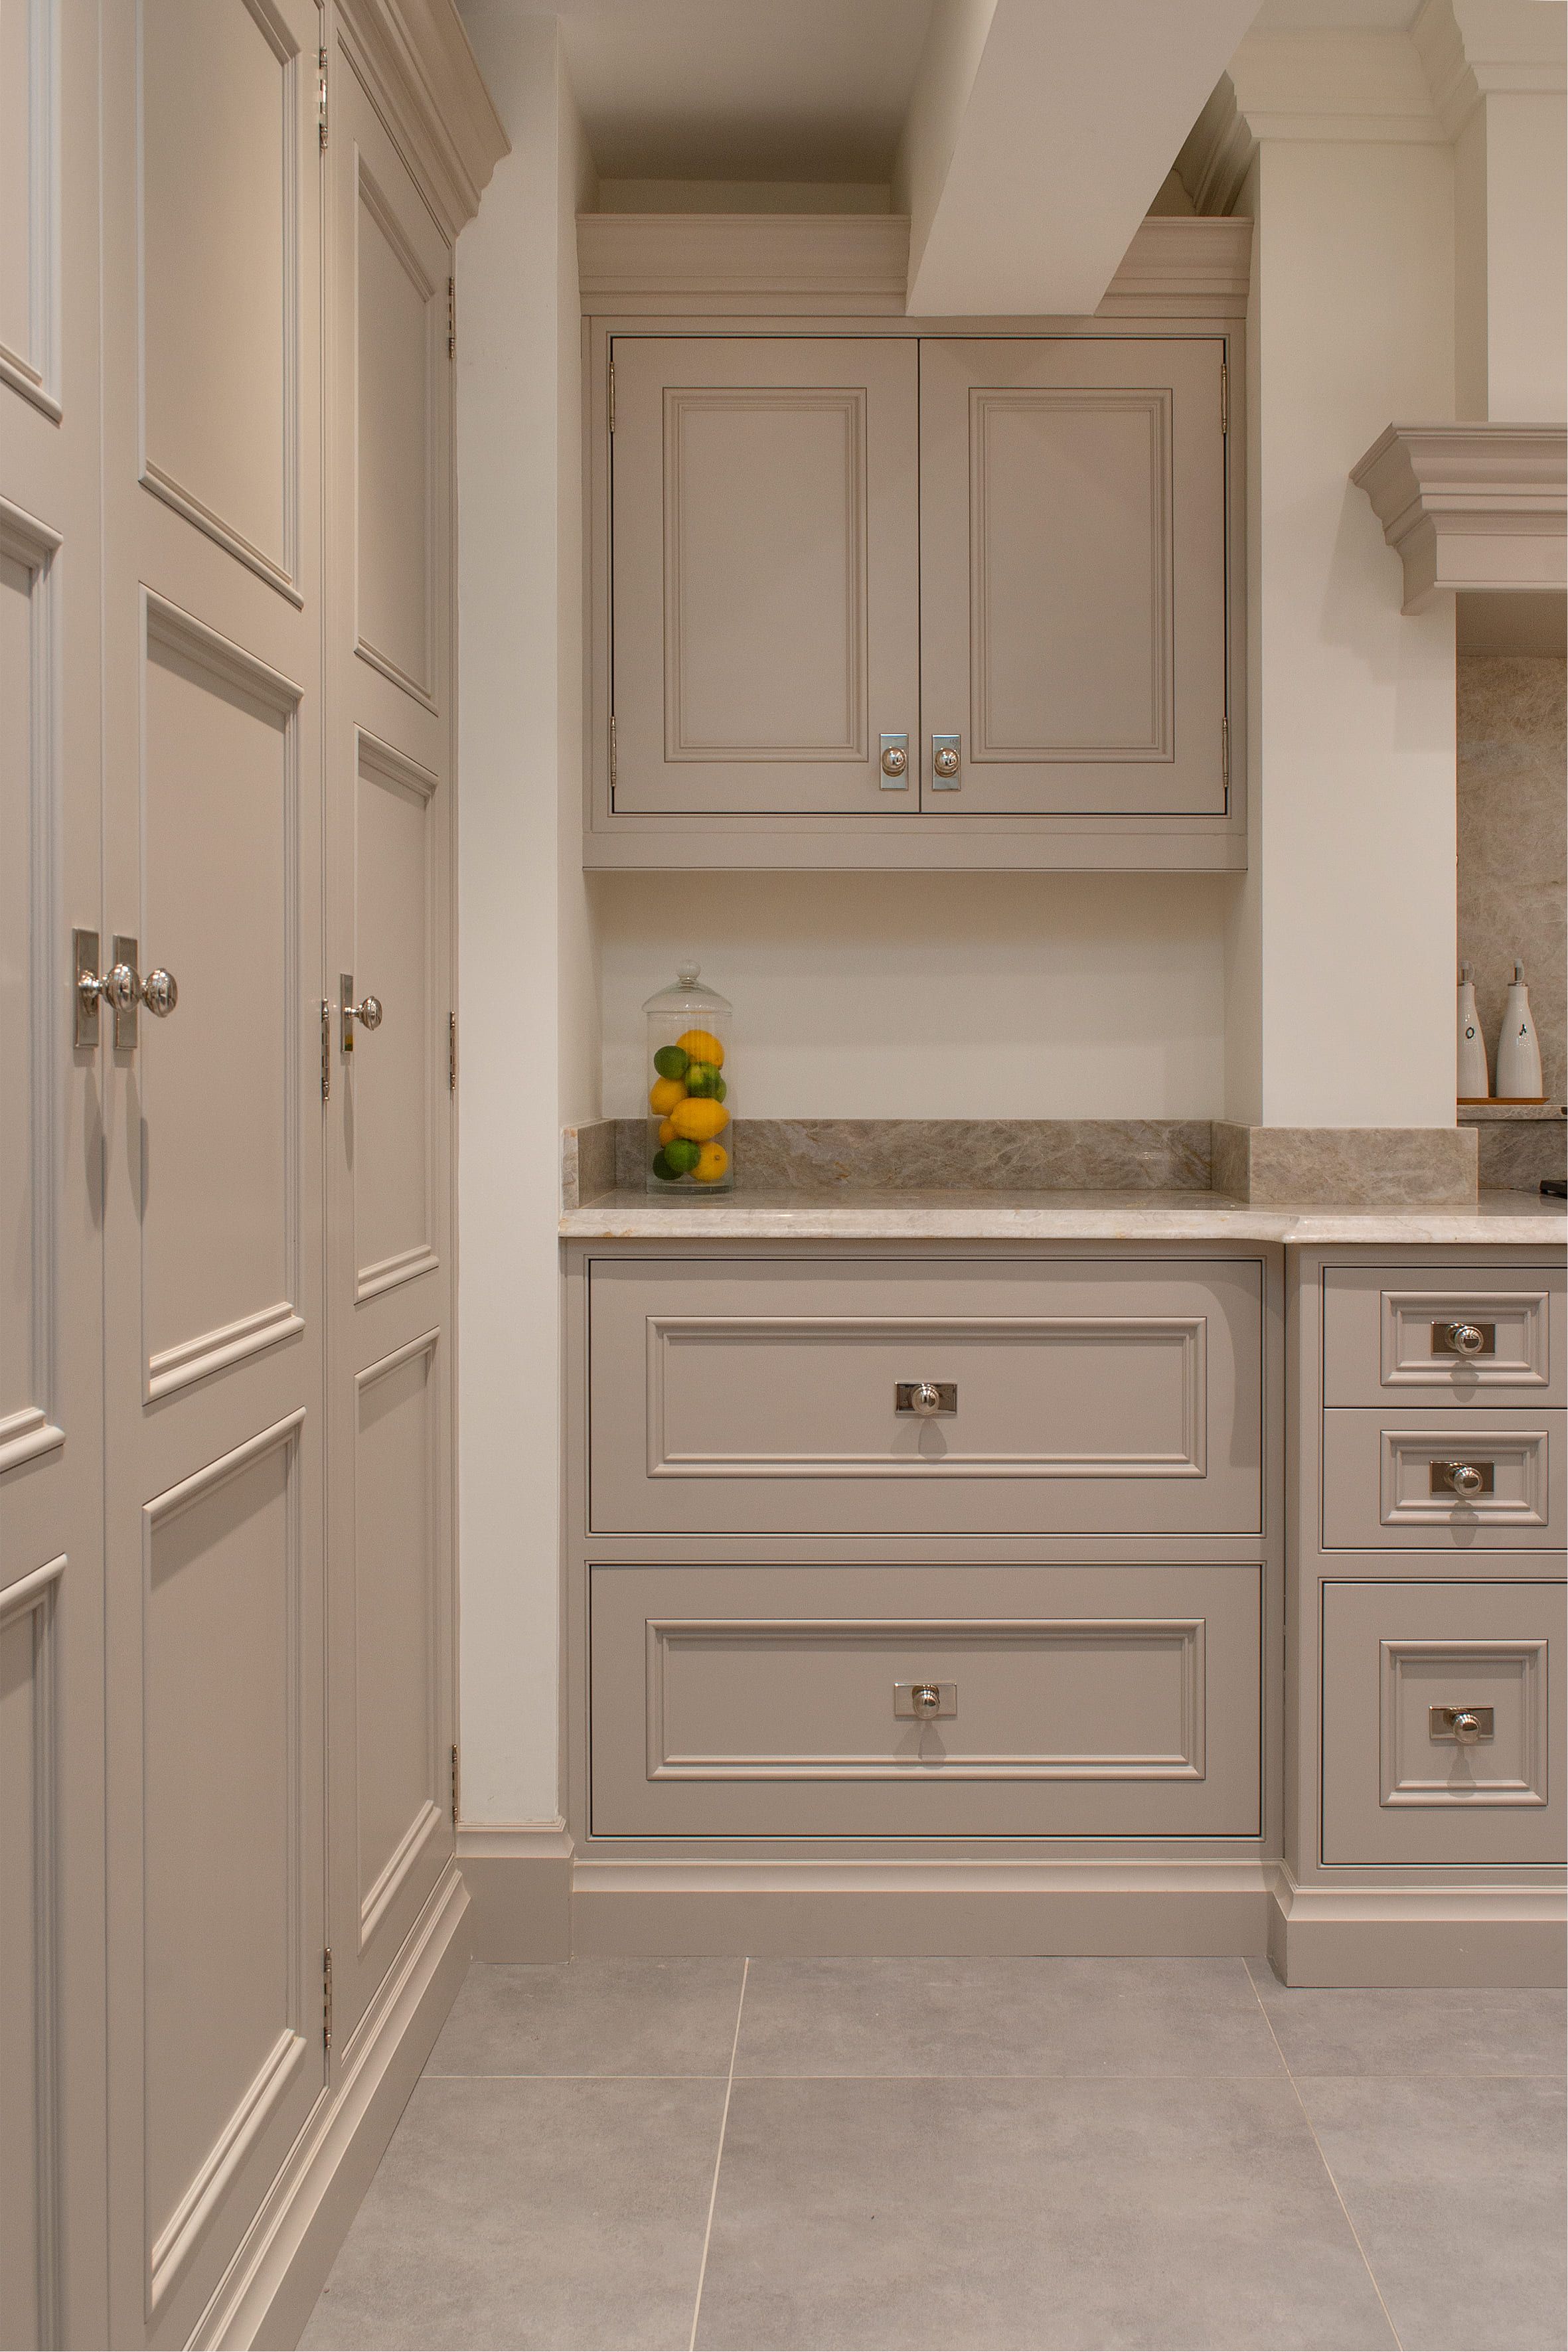 A number of bespoke shaker-style cabinets in a light-grey colour.